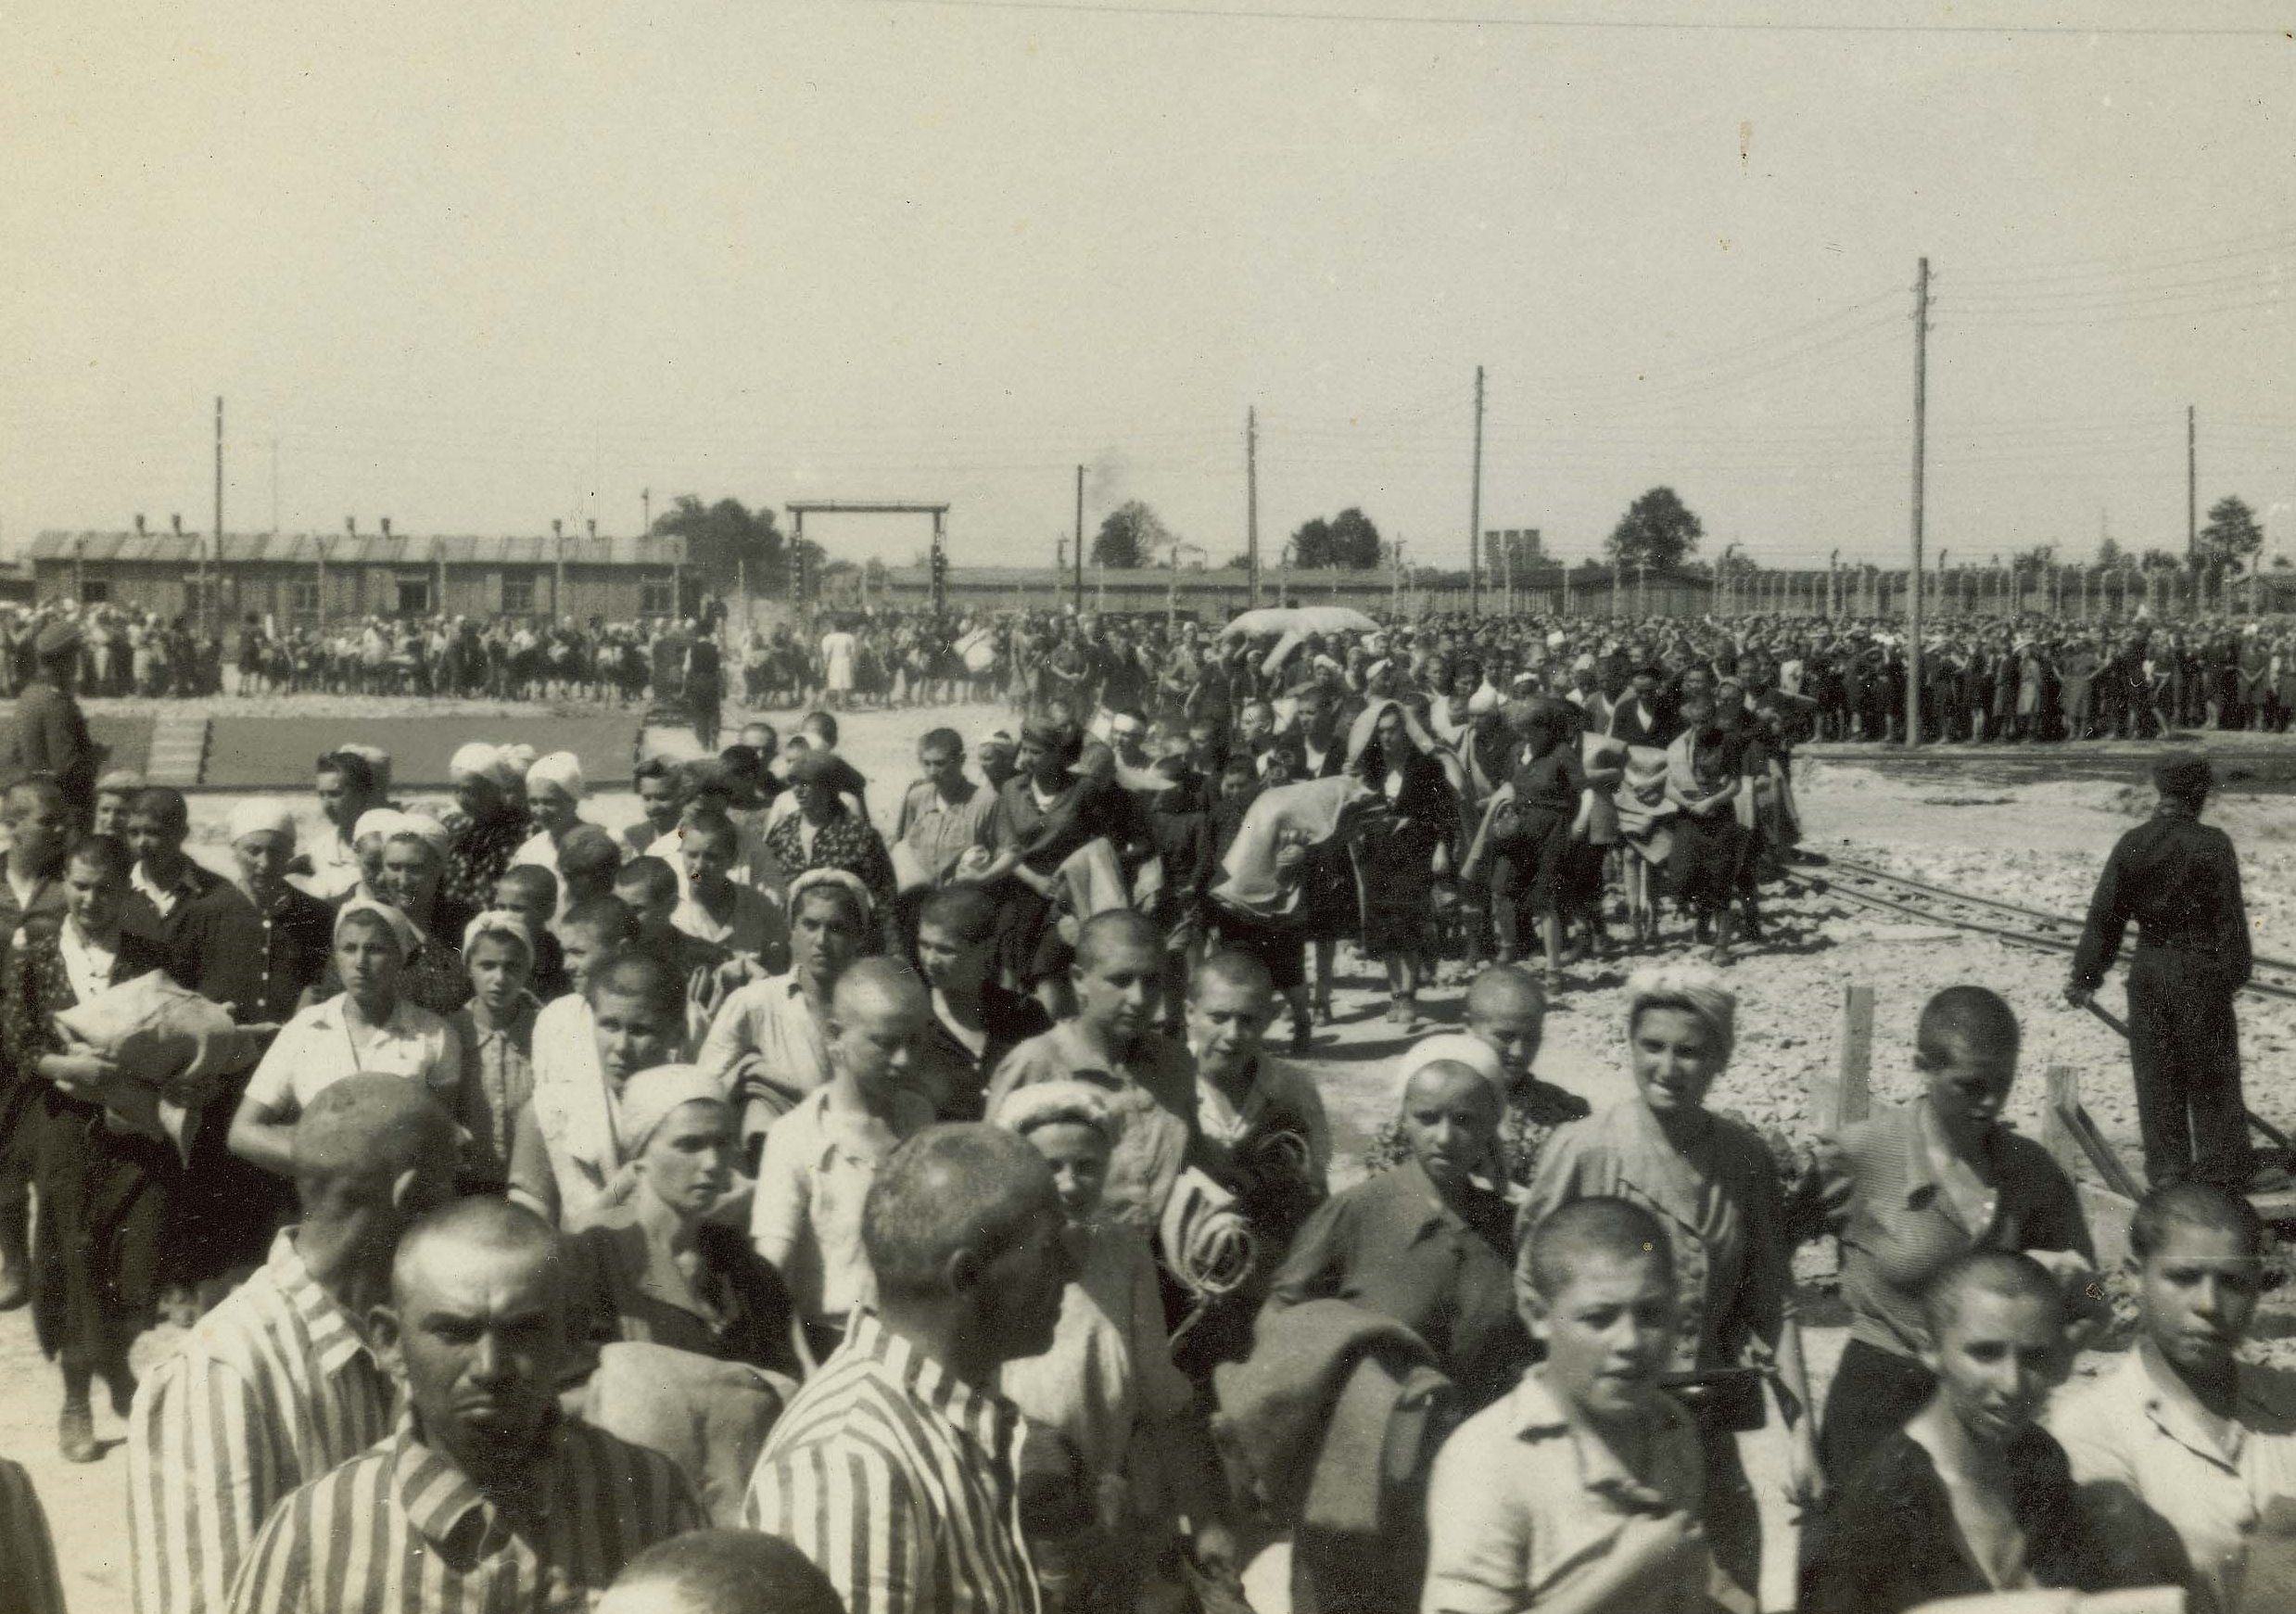 Jewish women waiting outside to be directed to the residential barracks. Place is crowded and everyone is crammed. Columns of prisoners are standing at the back. Behind them are the barracks and the camp fence.